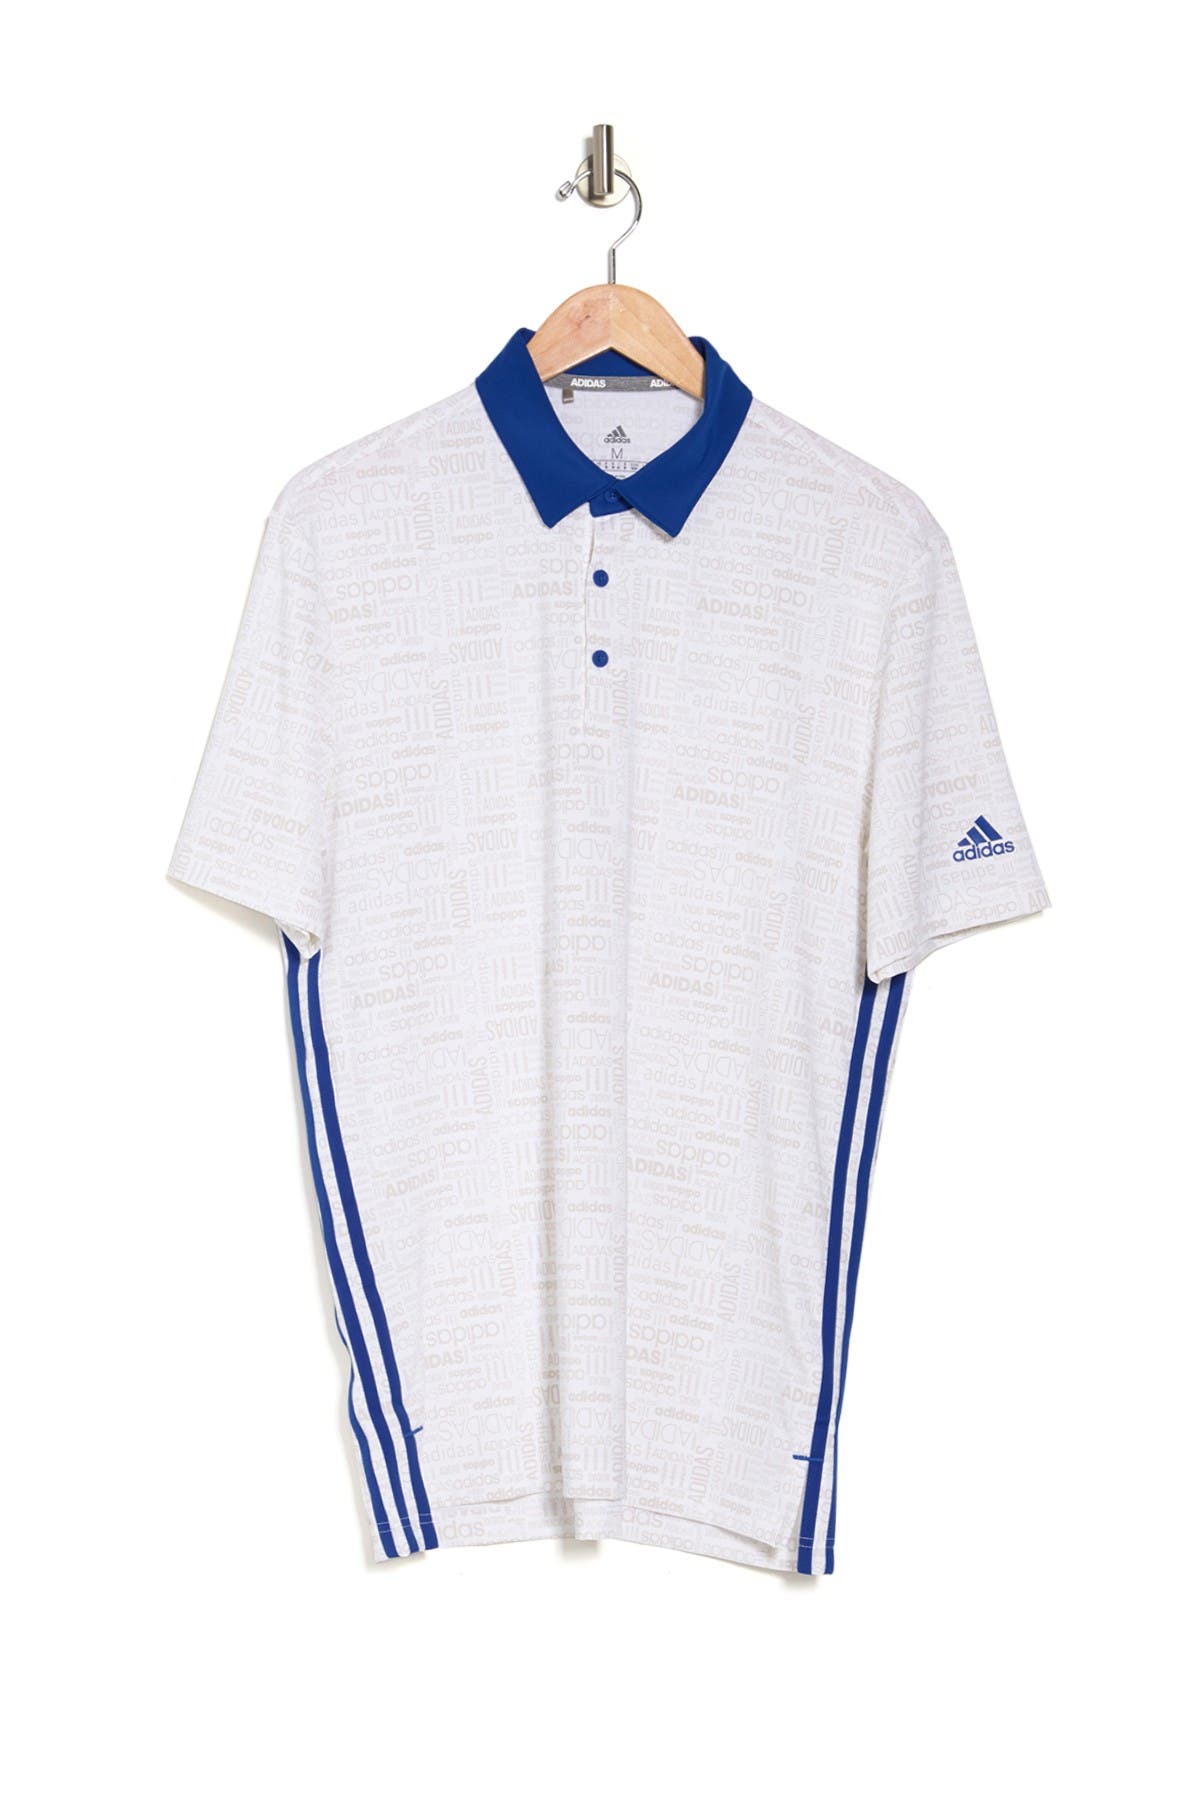 Adidas Golf Ultimate365 Polo Shirt In White